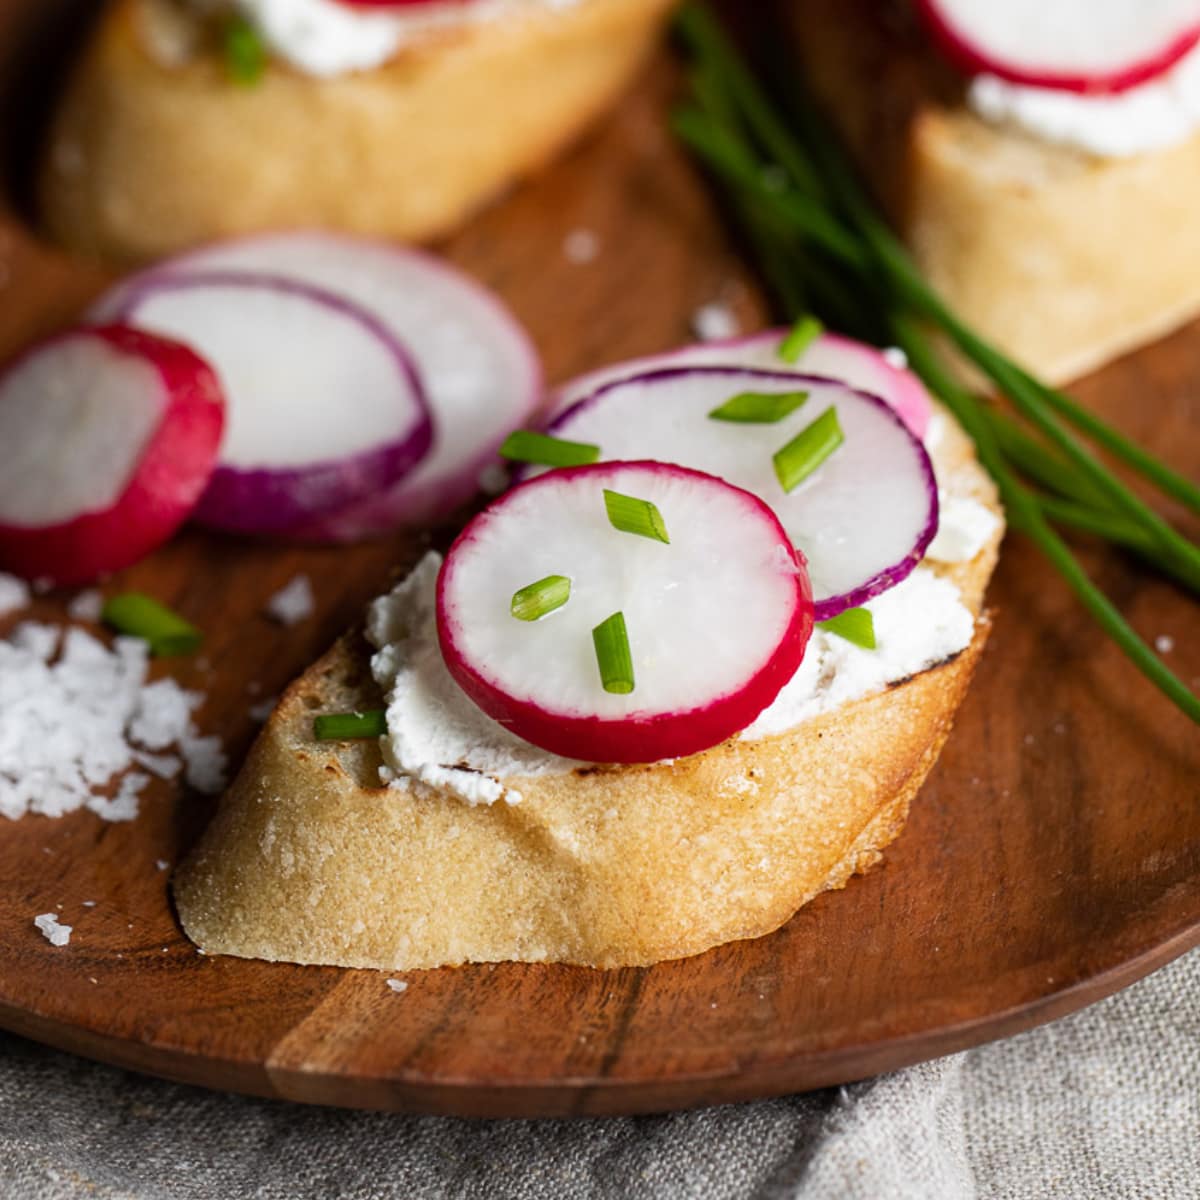 Slice of bread with cream and radishes